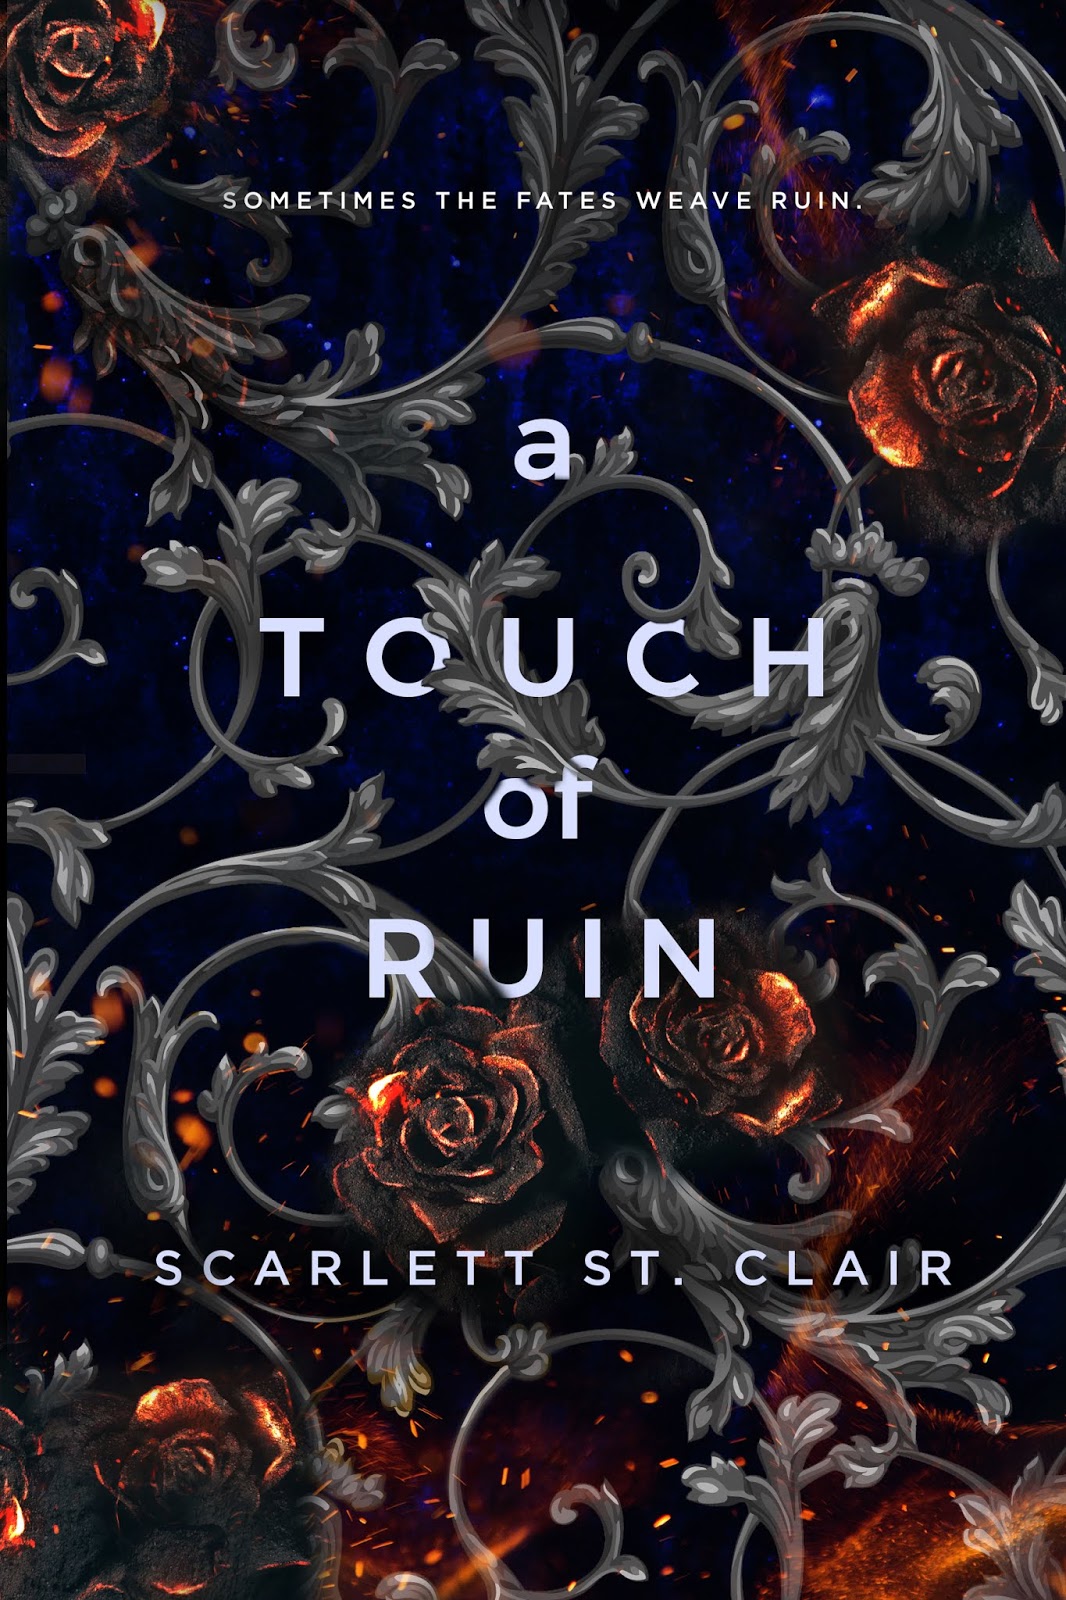 A TOUCH OF DARKNESS and A TOUCH OF RUIN by Scarlett St